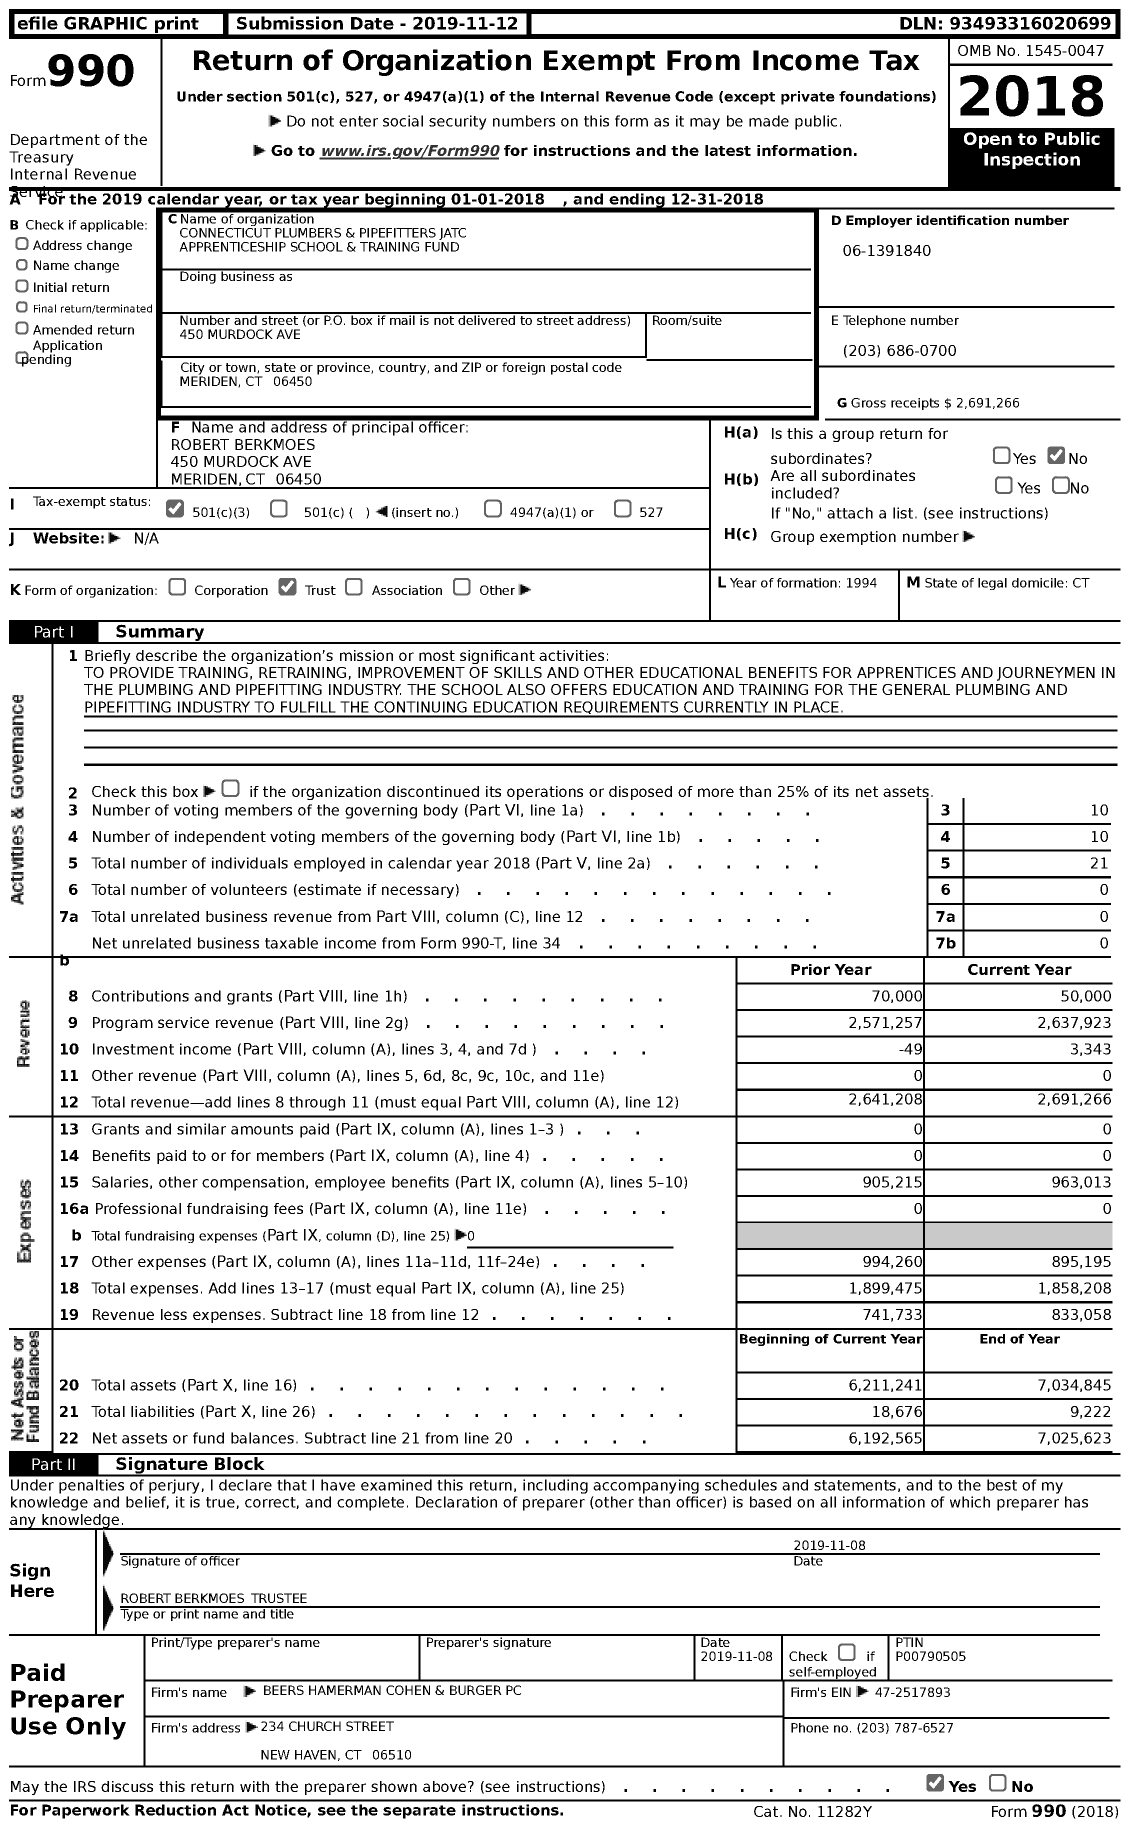 Image of first page of 2018 Form 990 for Connecticut Plumbers and Pipefitters Jatc Apprenticeship School and Training Fund